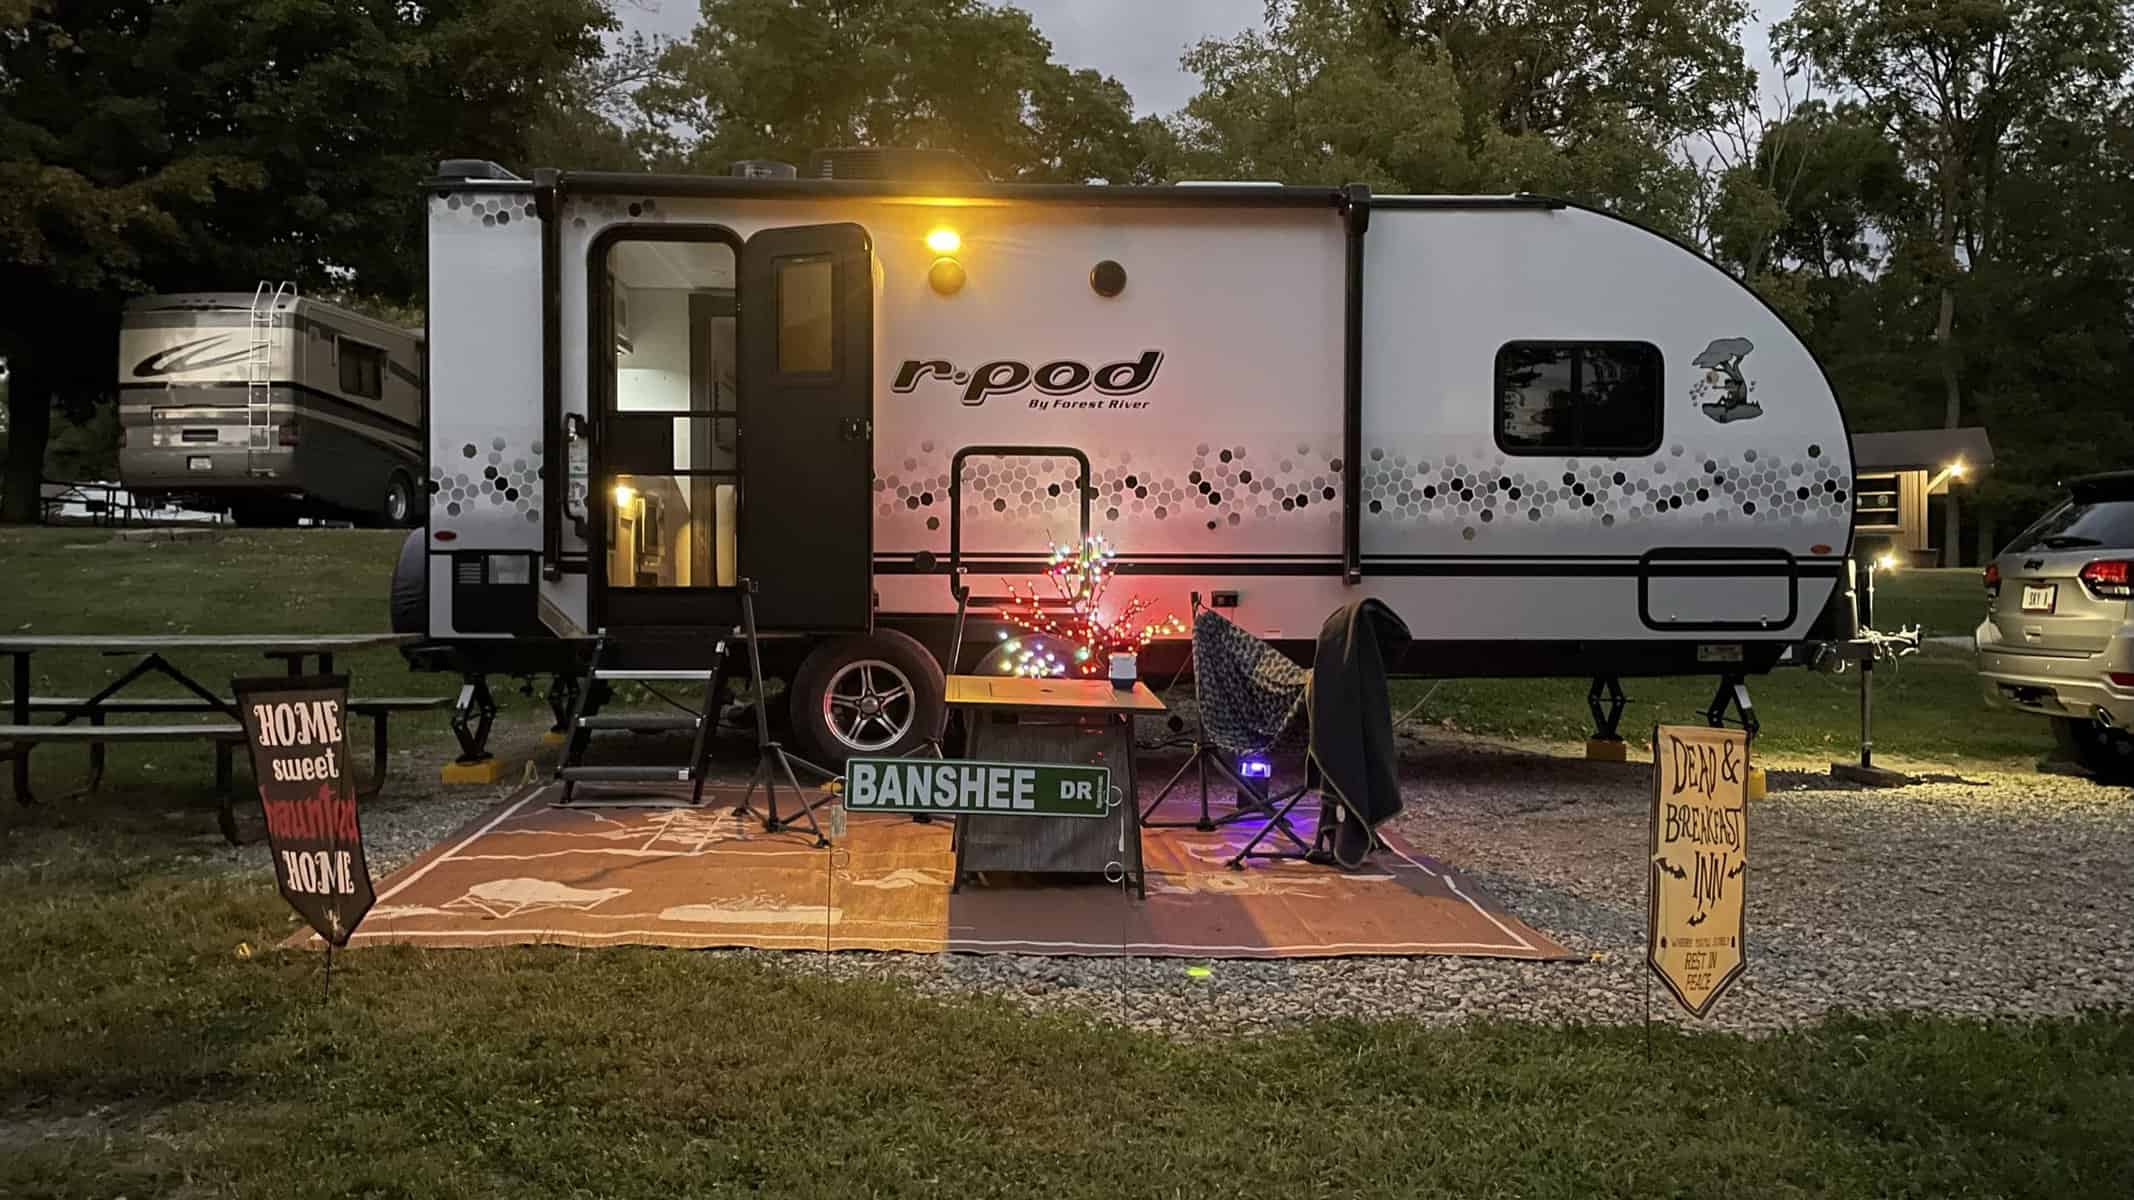 r-pod RP-202 fall Halloween campsite patio in Wilmington, NC (Image with permission: Sky Arvin)